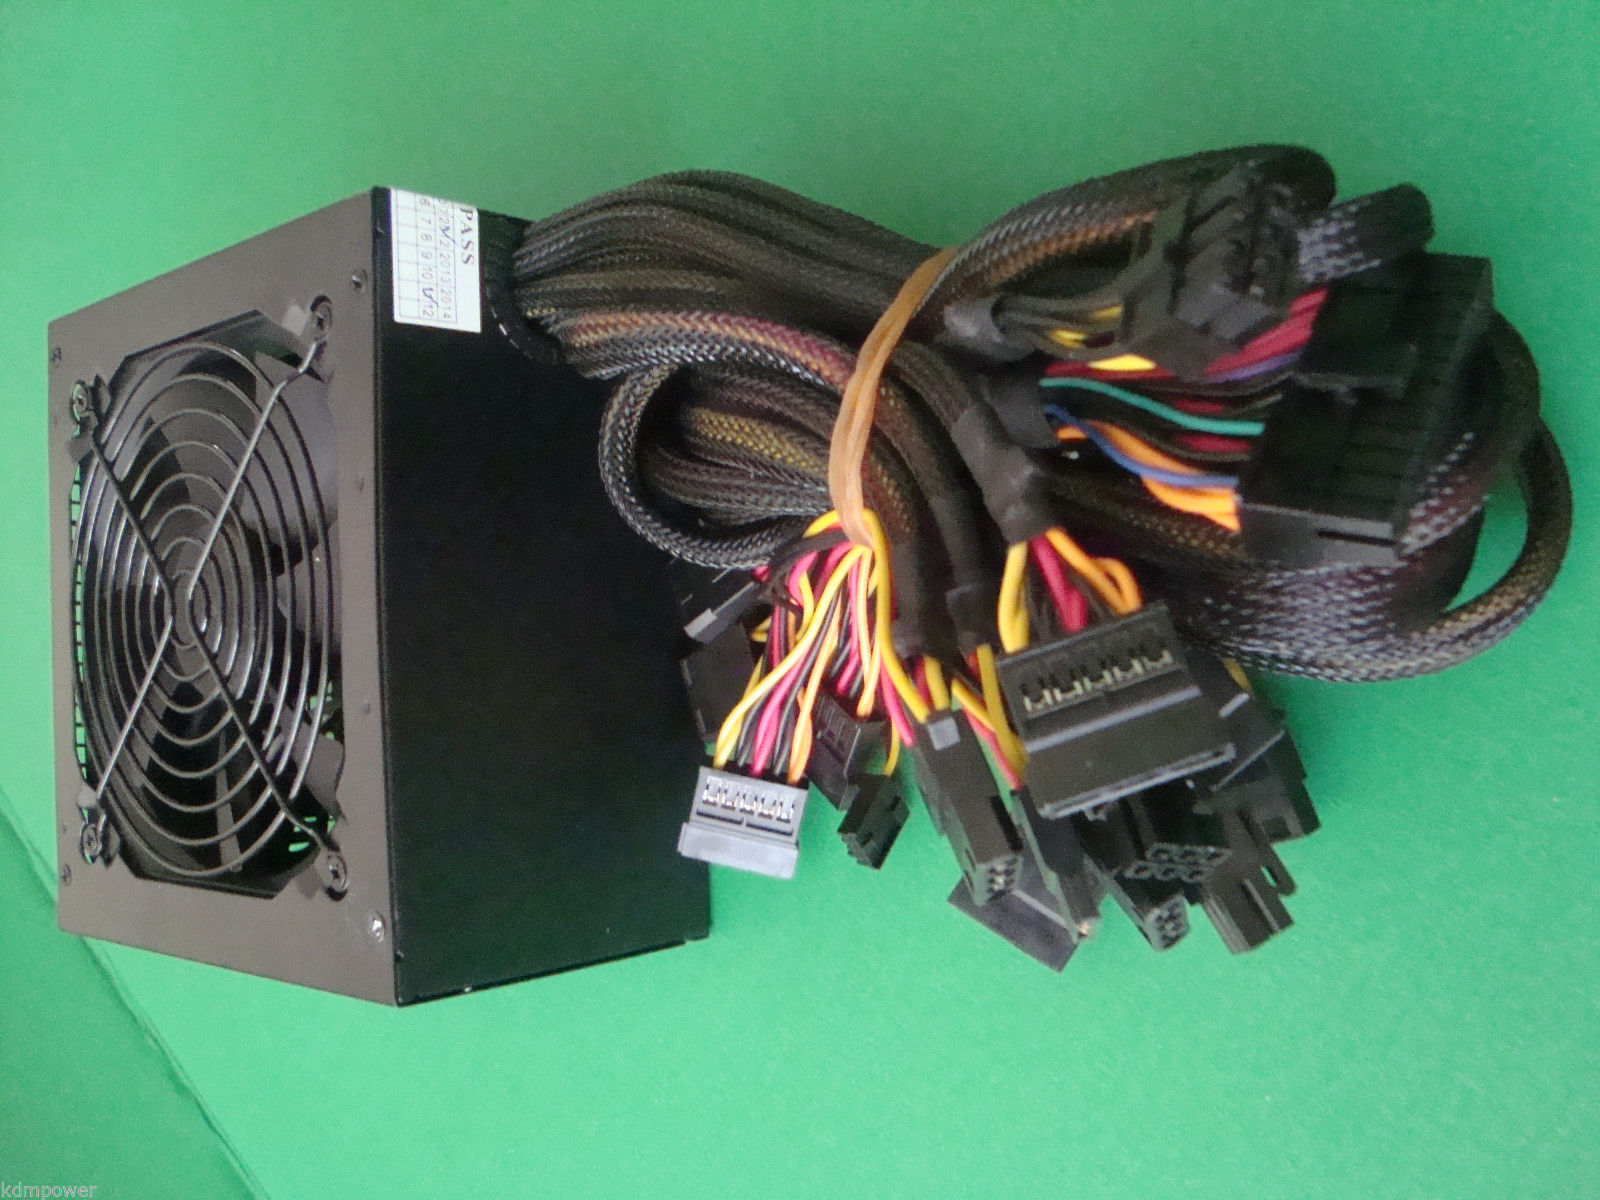 750W HP Pavilion PRODESK D11-300N1A 667893-002 715185-001 Power Supply REPLACE